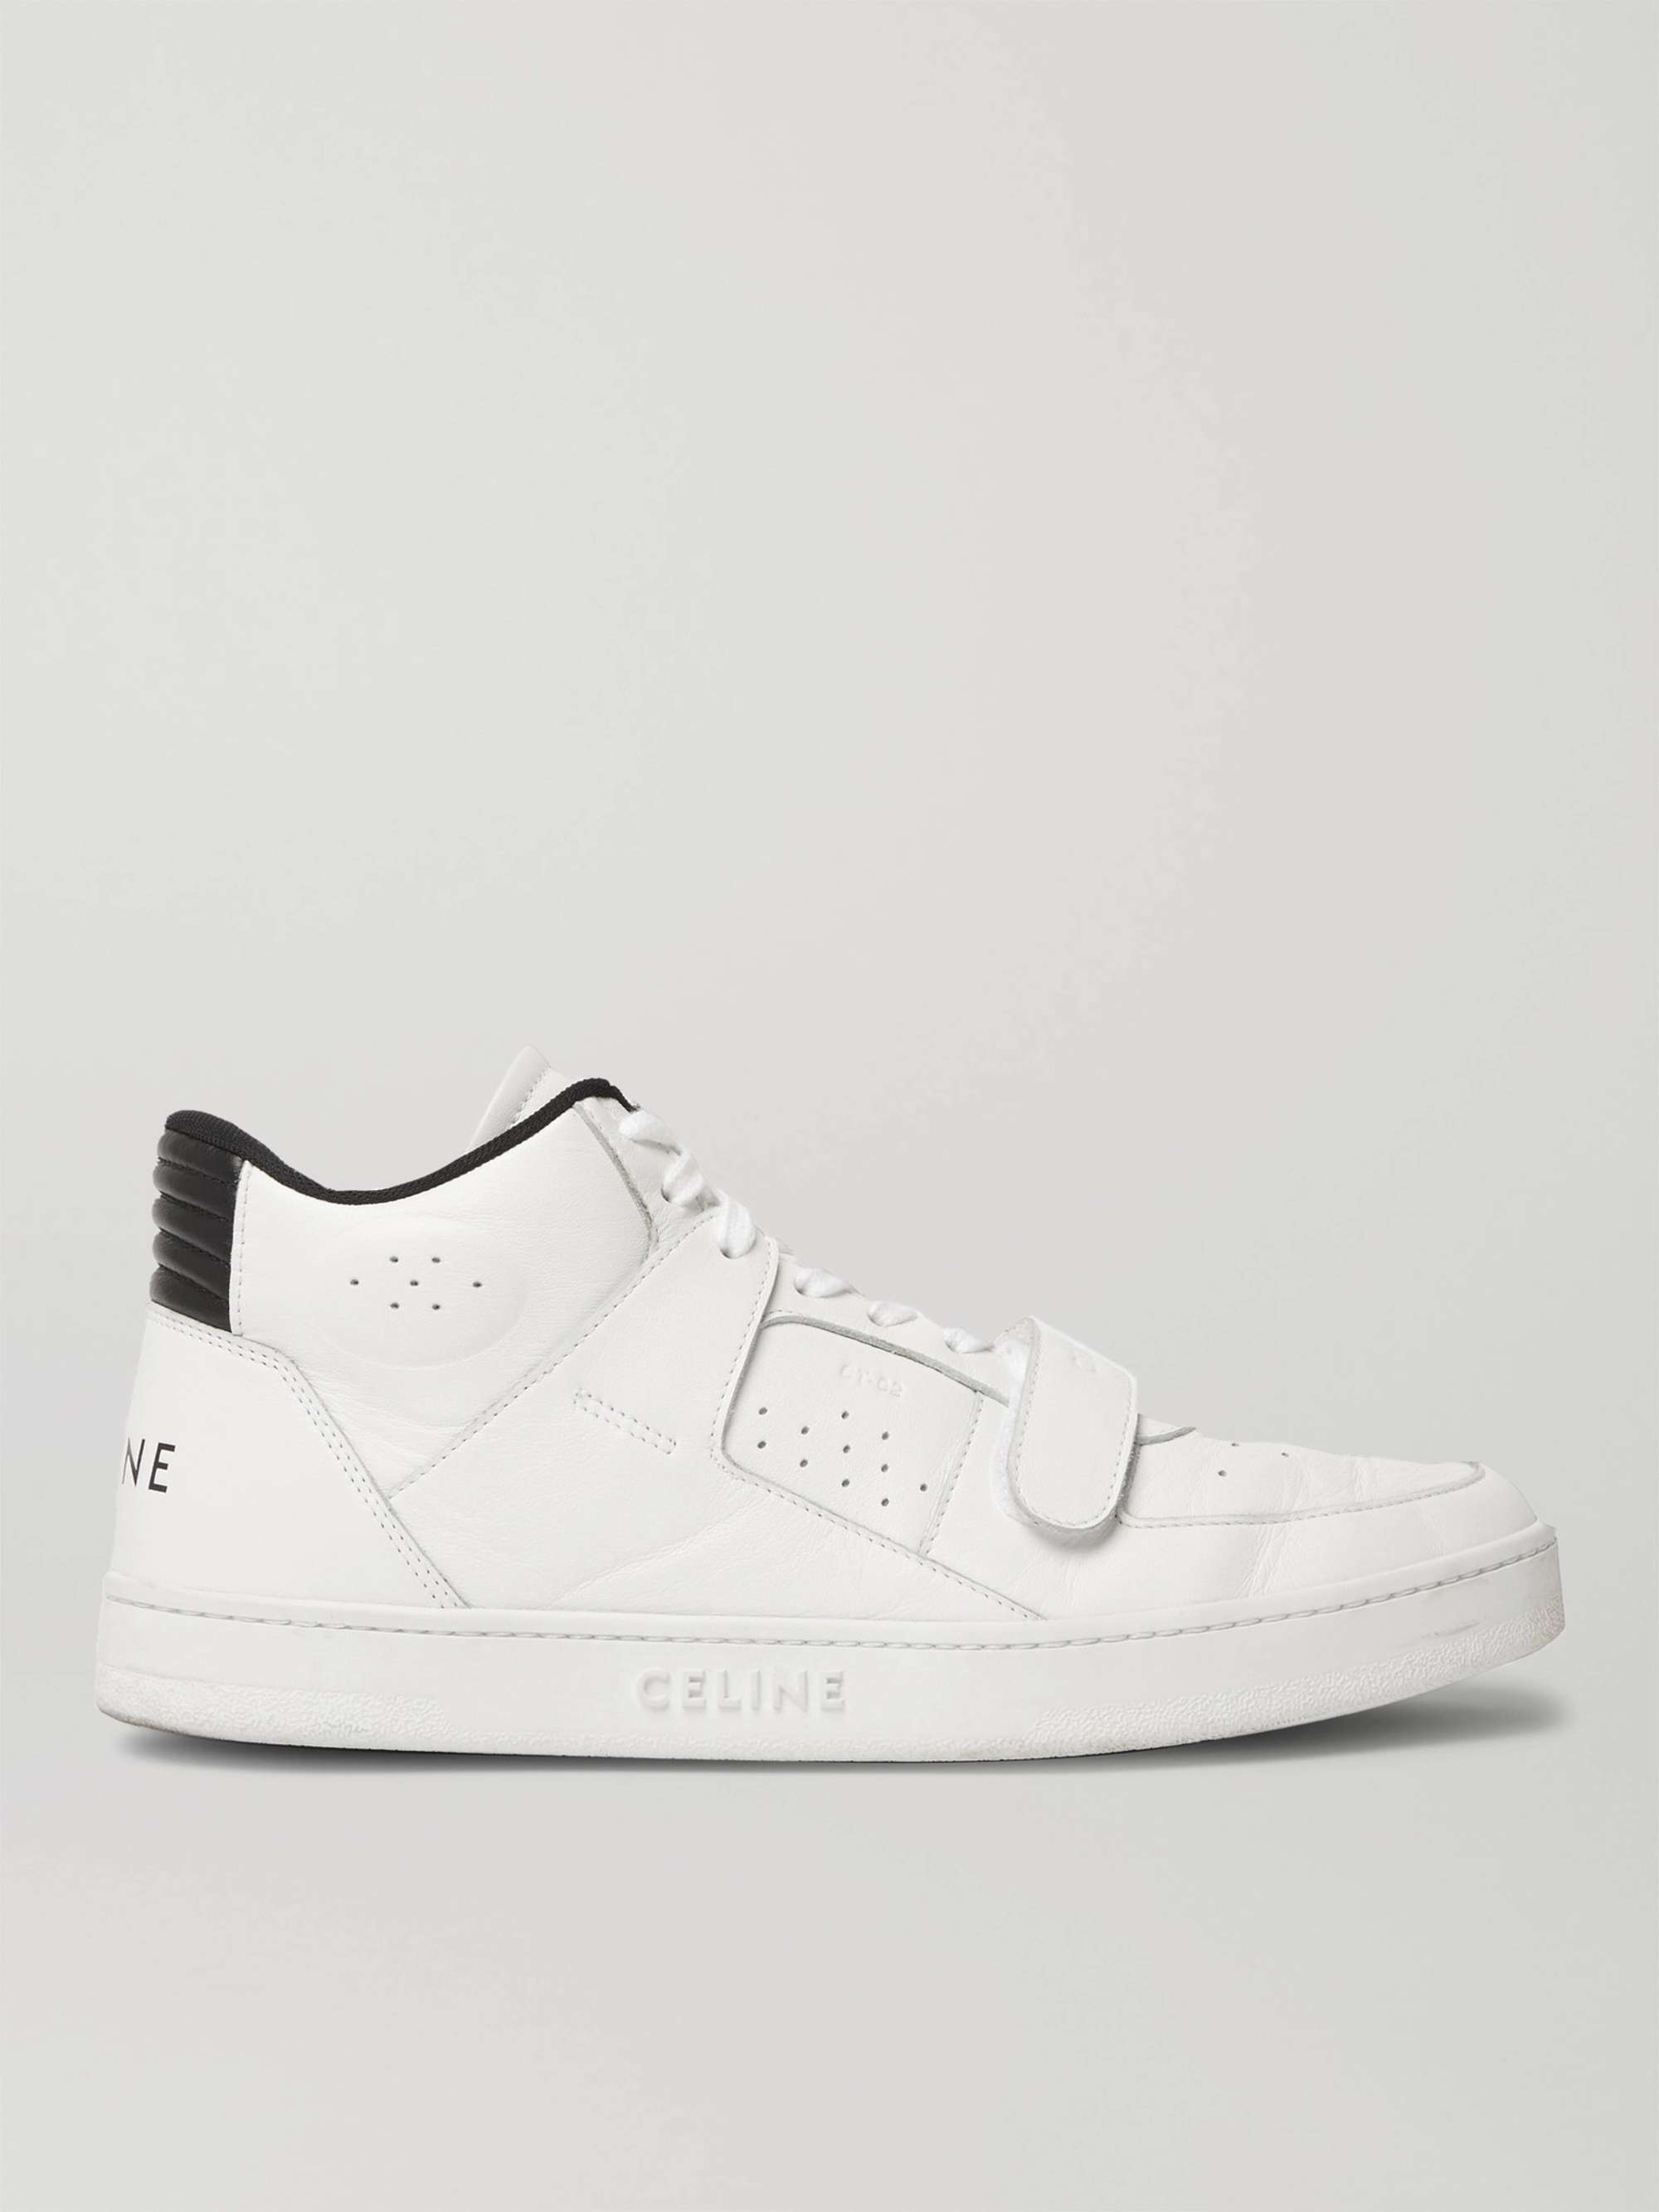 White CT-02 Leather Sneakers | CELINE HOMME | MR PORTER